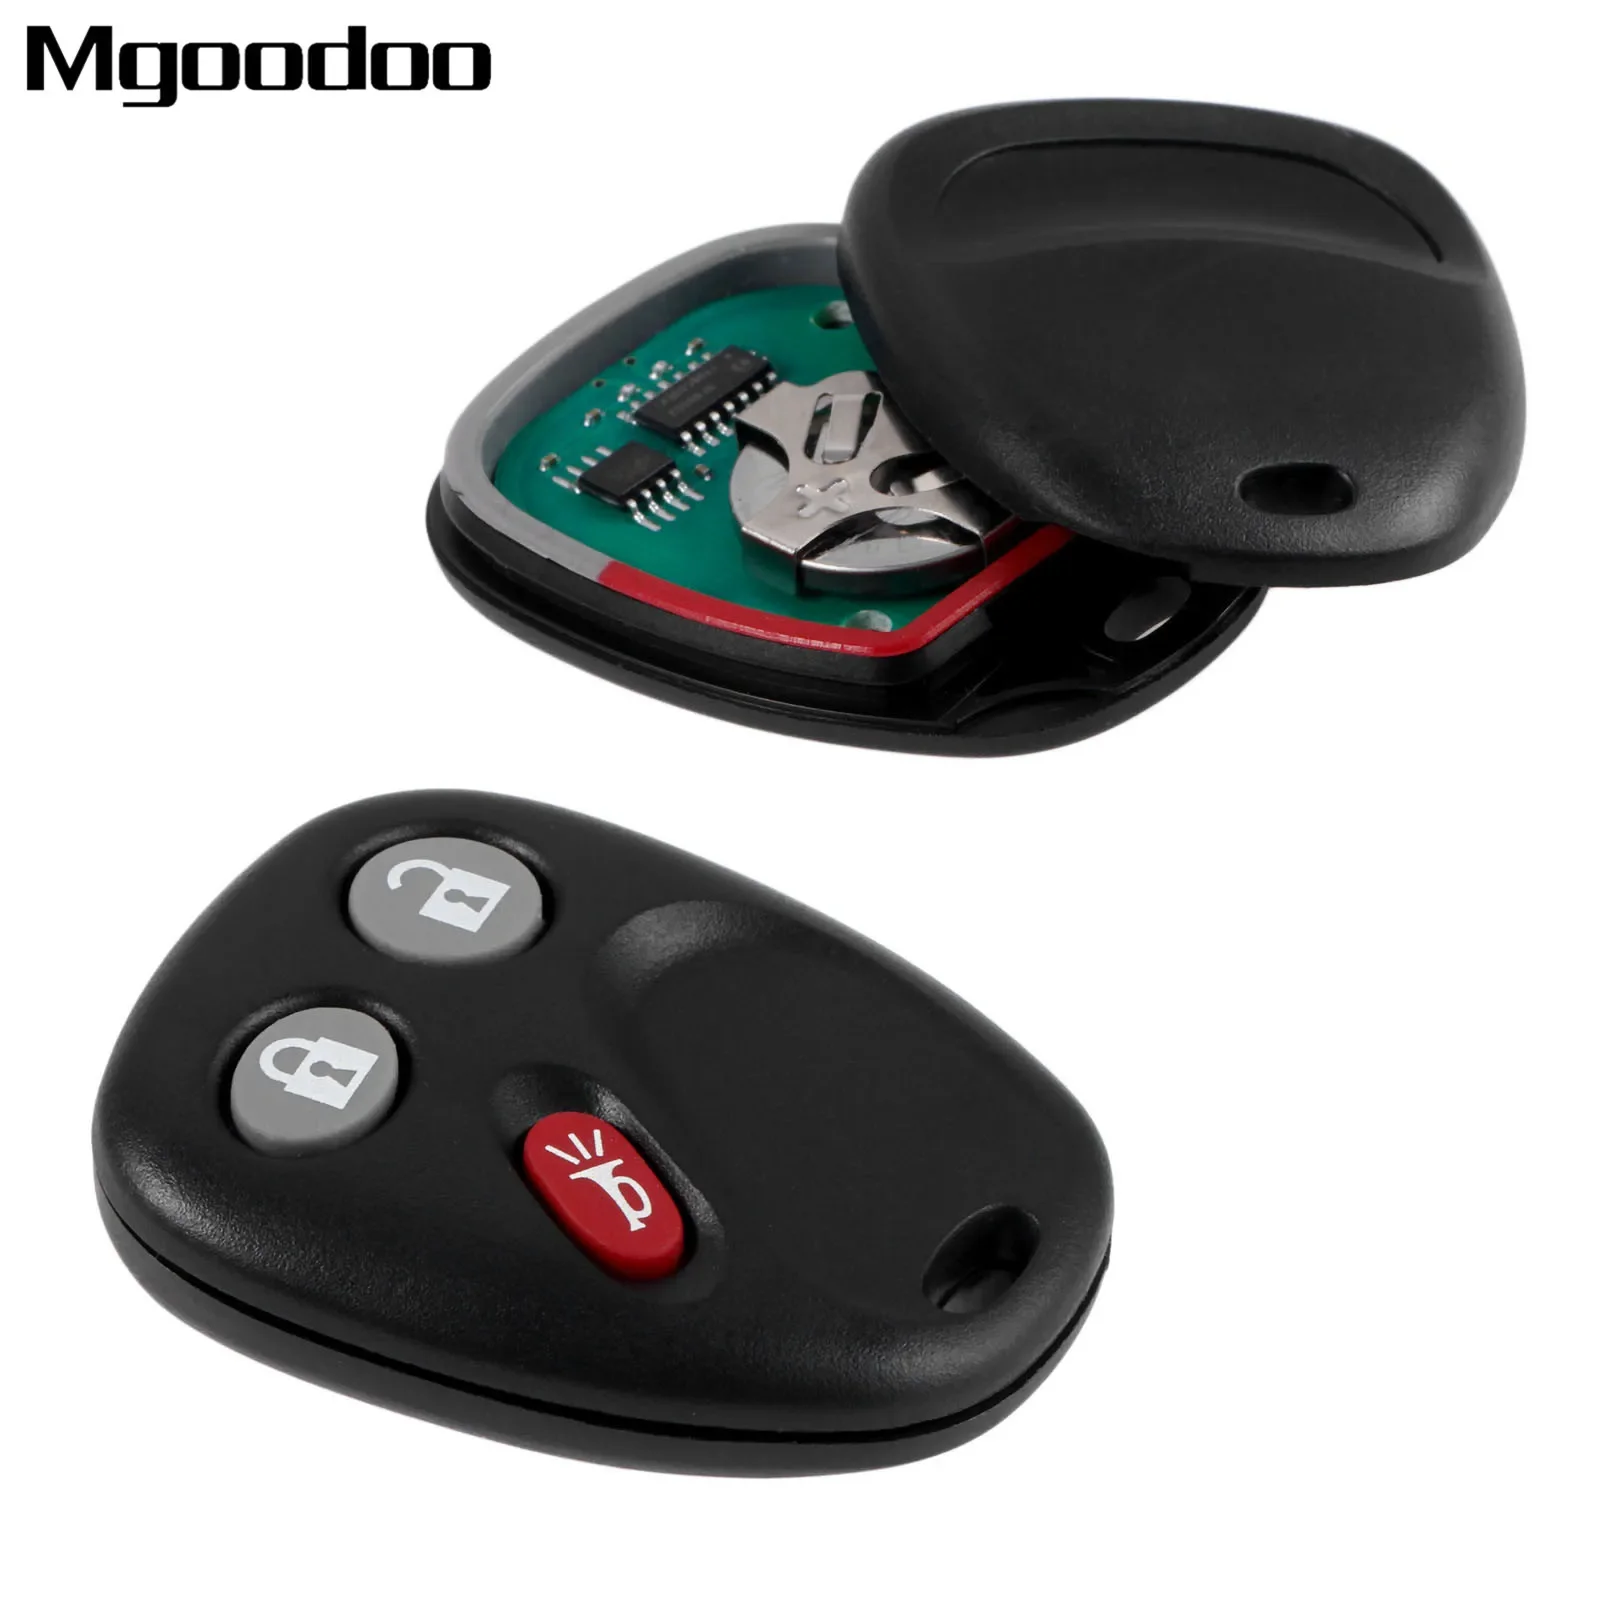 3 Button Remote Car Key Fob Shell LHJ011 For G M Hummer H2 Chevrolet Avalanche Tahoe Cadillac Escalade 2003-2005 2006 315mhz